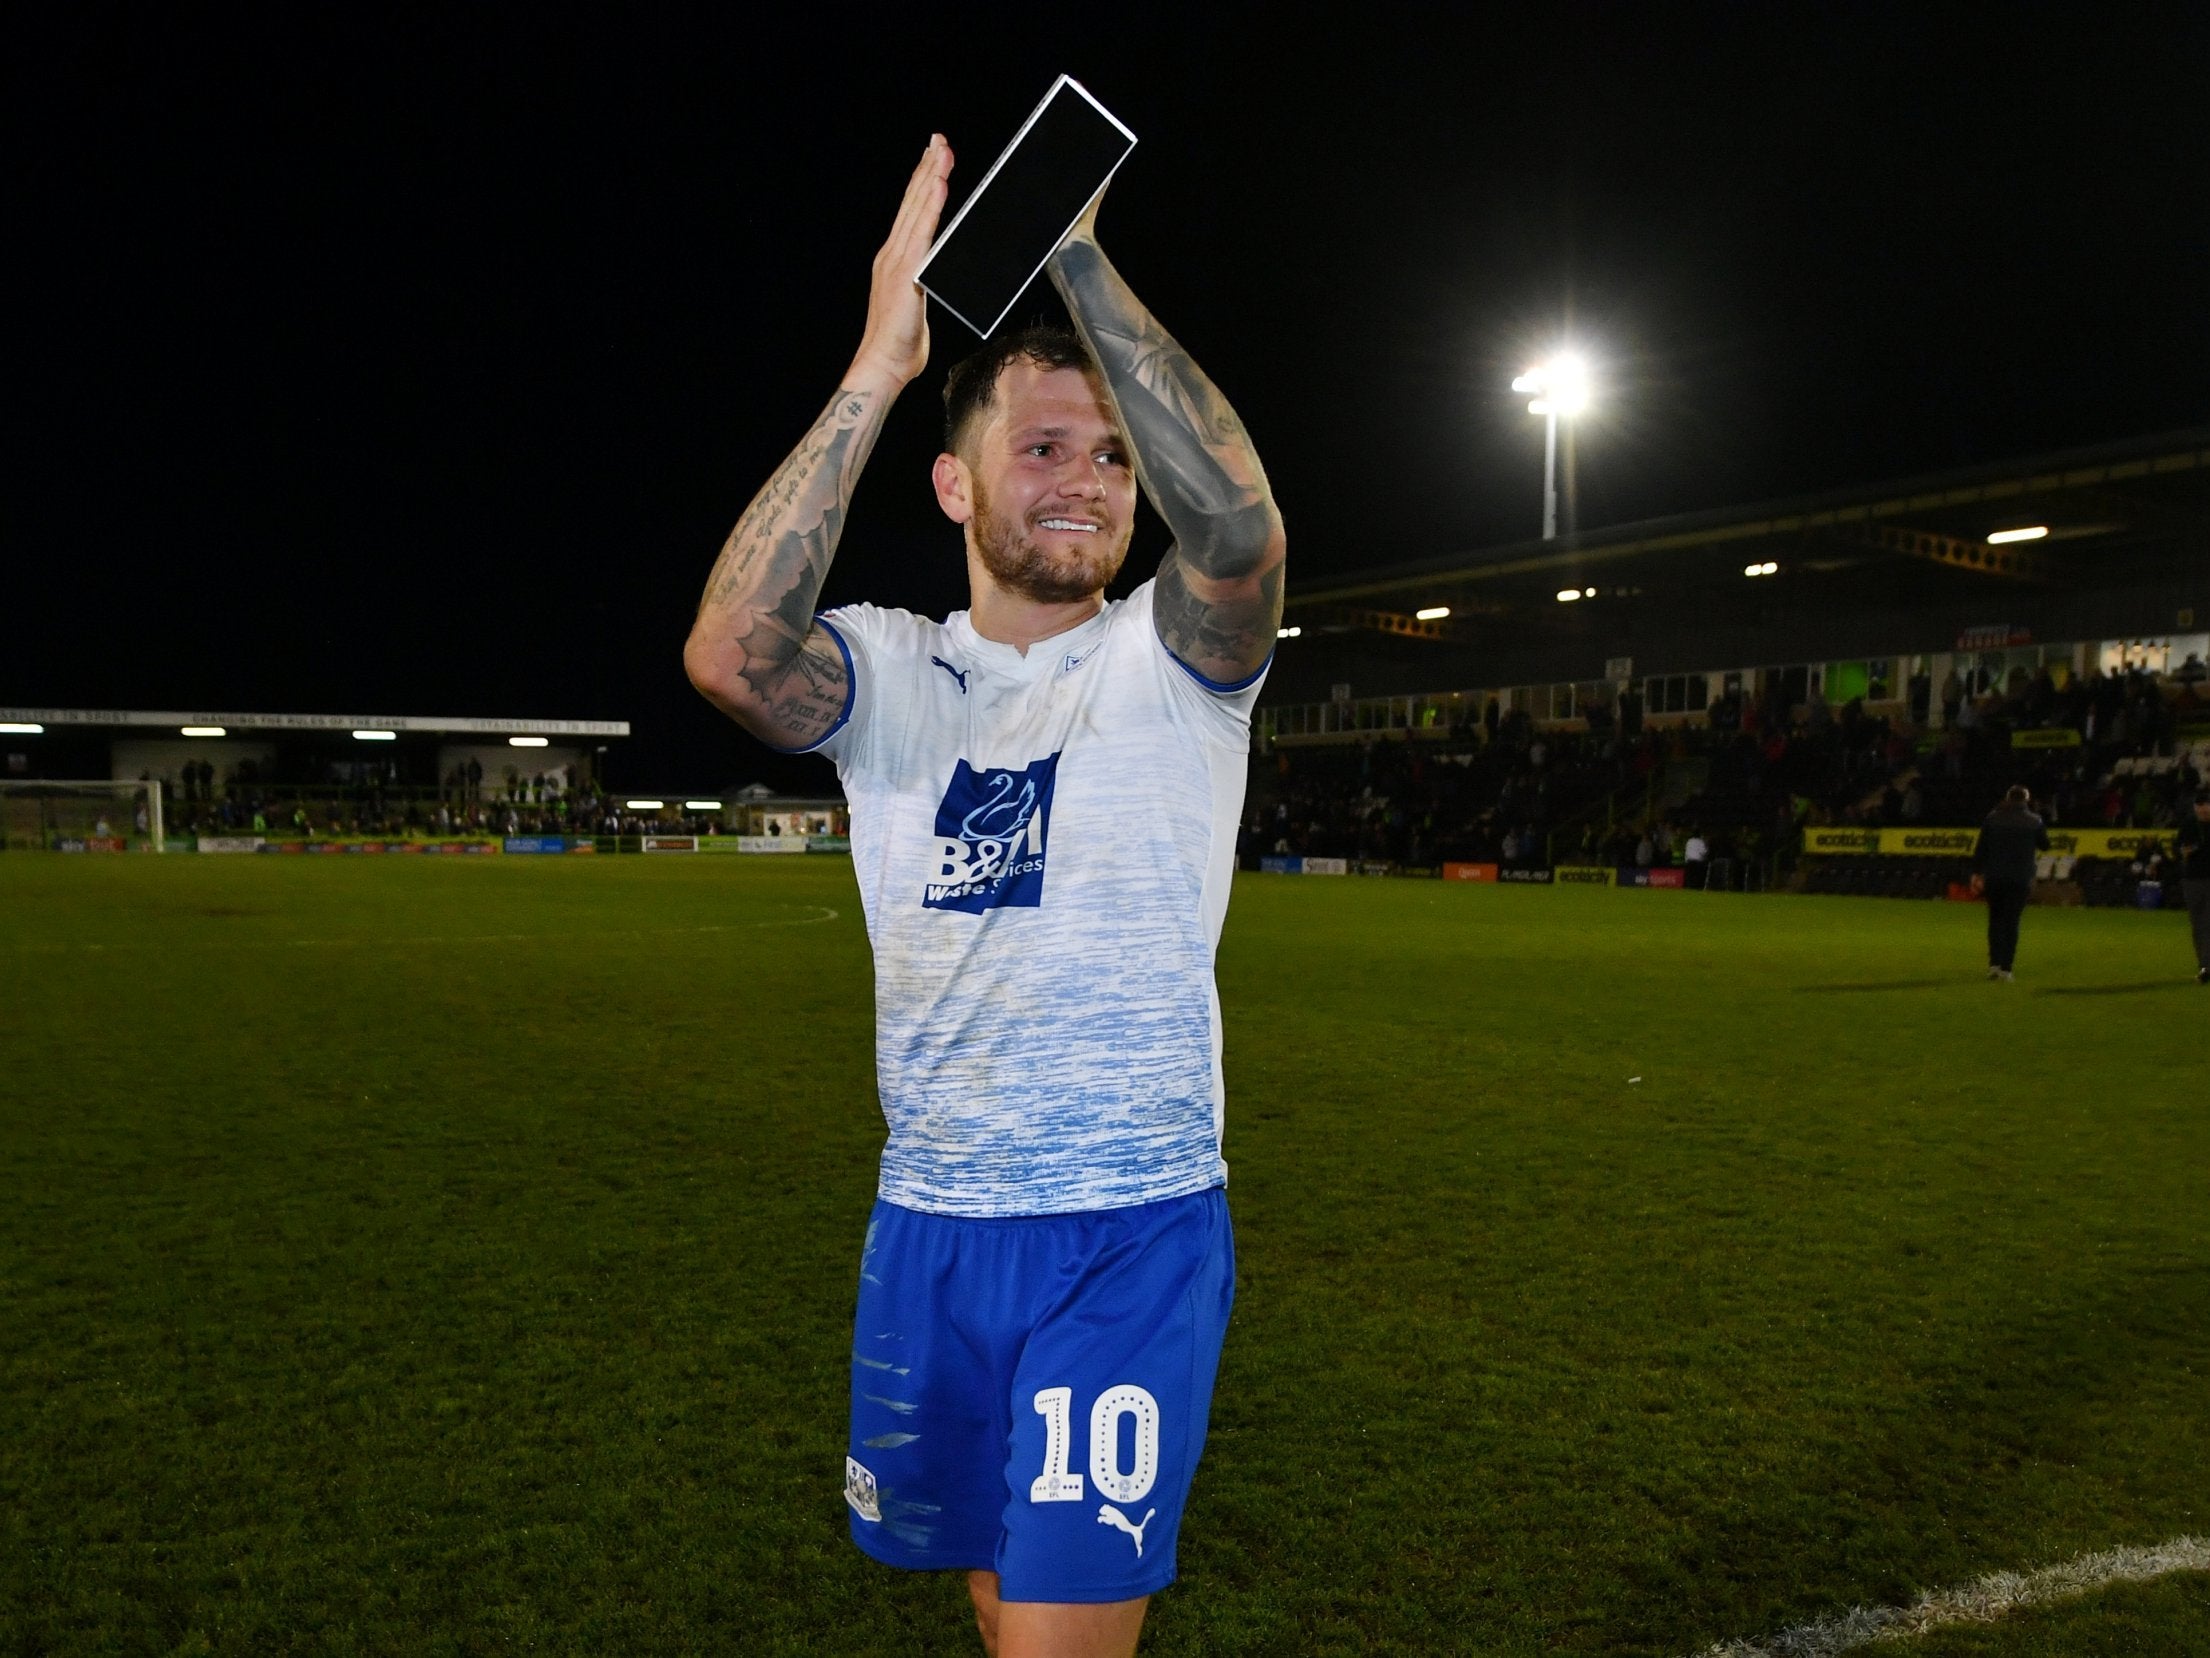 James Norwood scored the winning goal for Tranmere